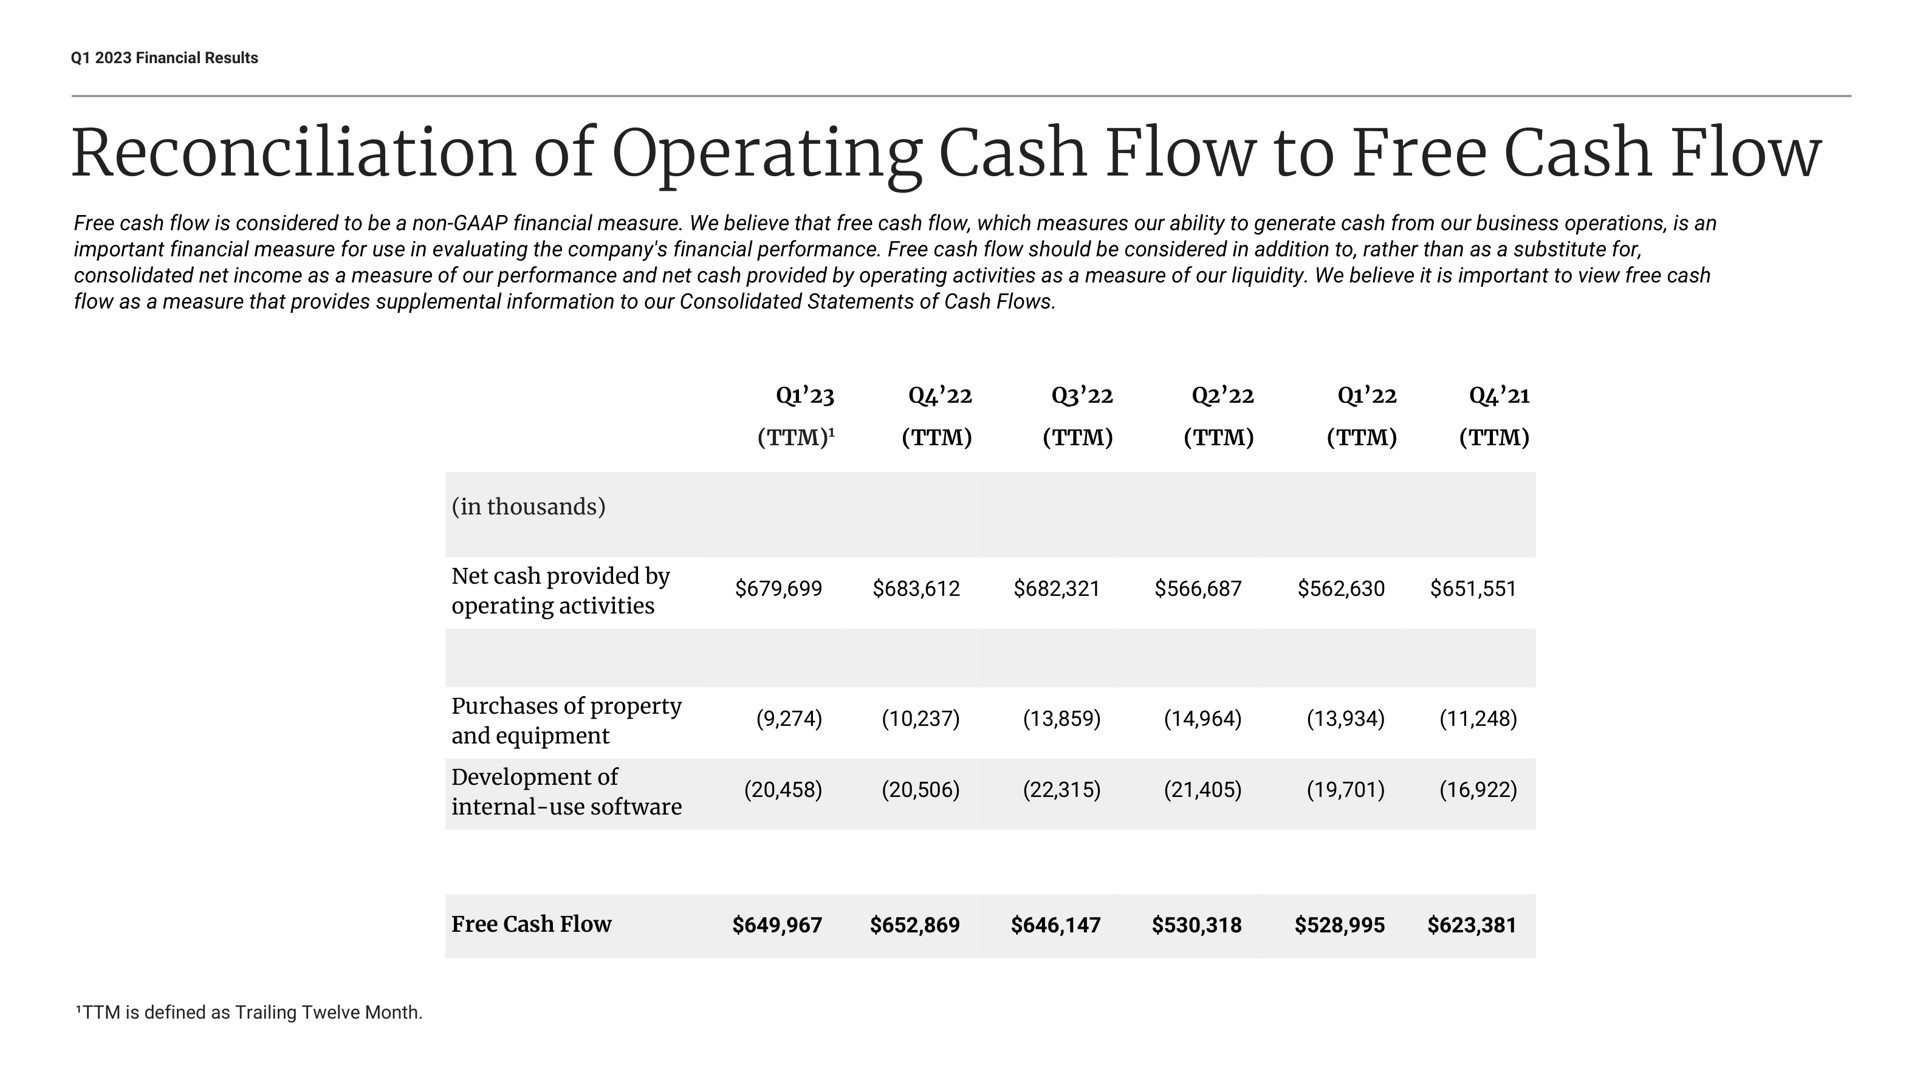 reconciliation of operating cash flow to free cash flow | Etsy